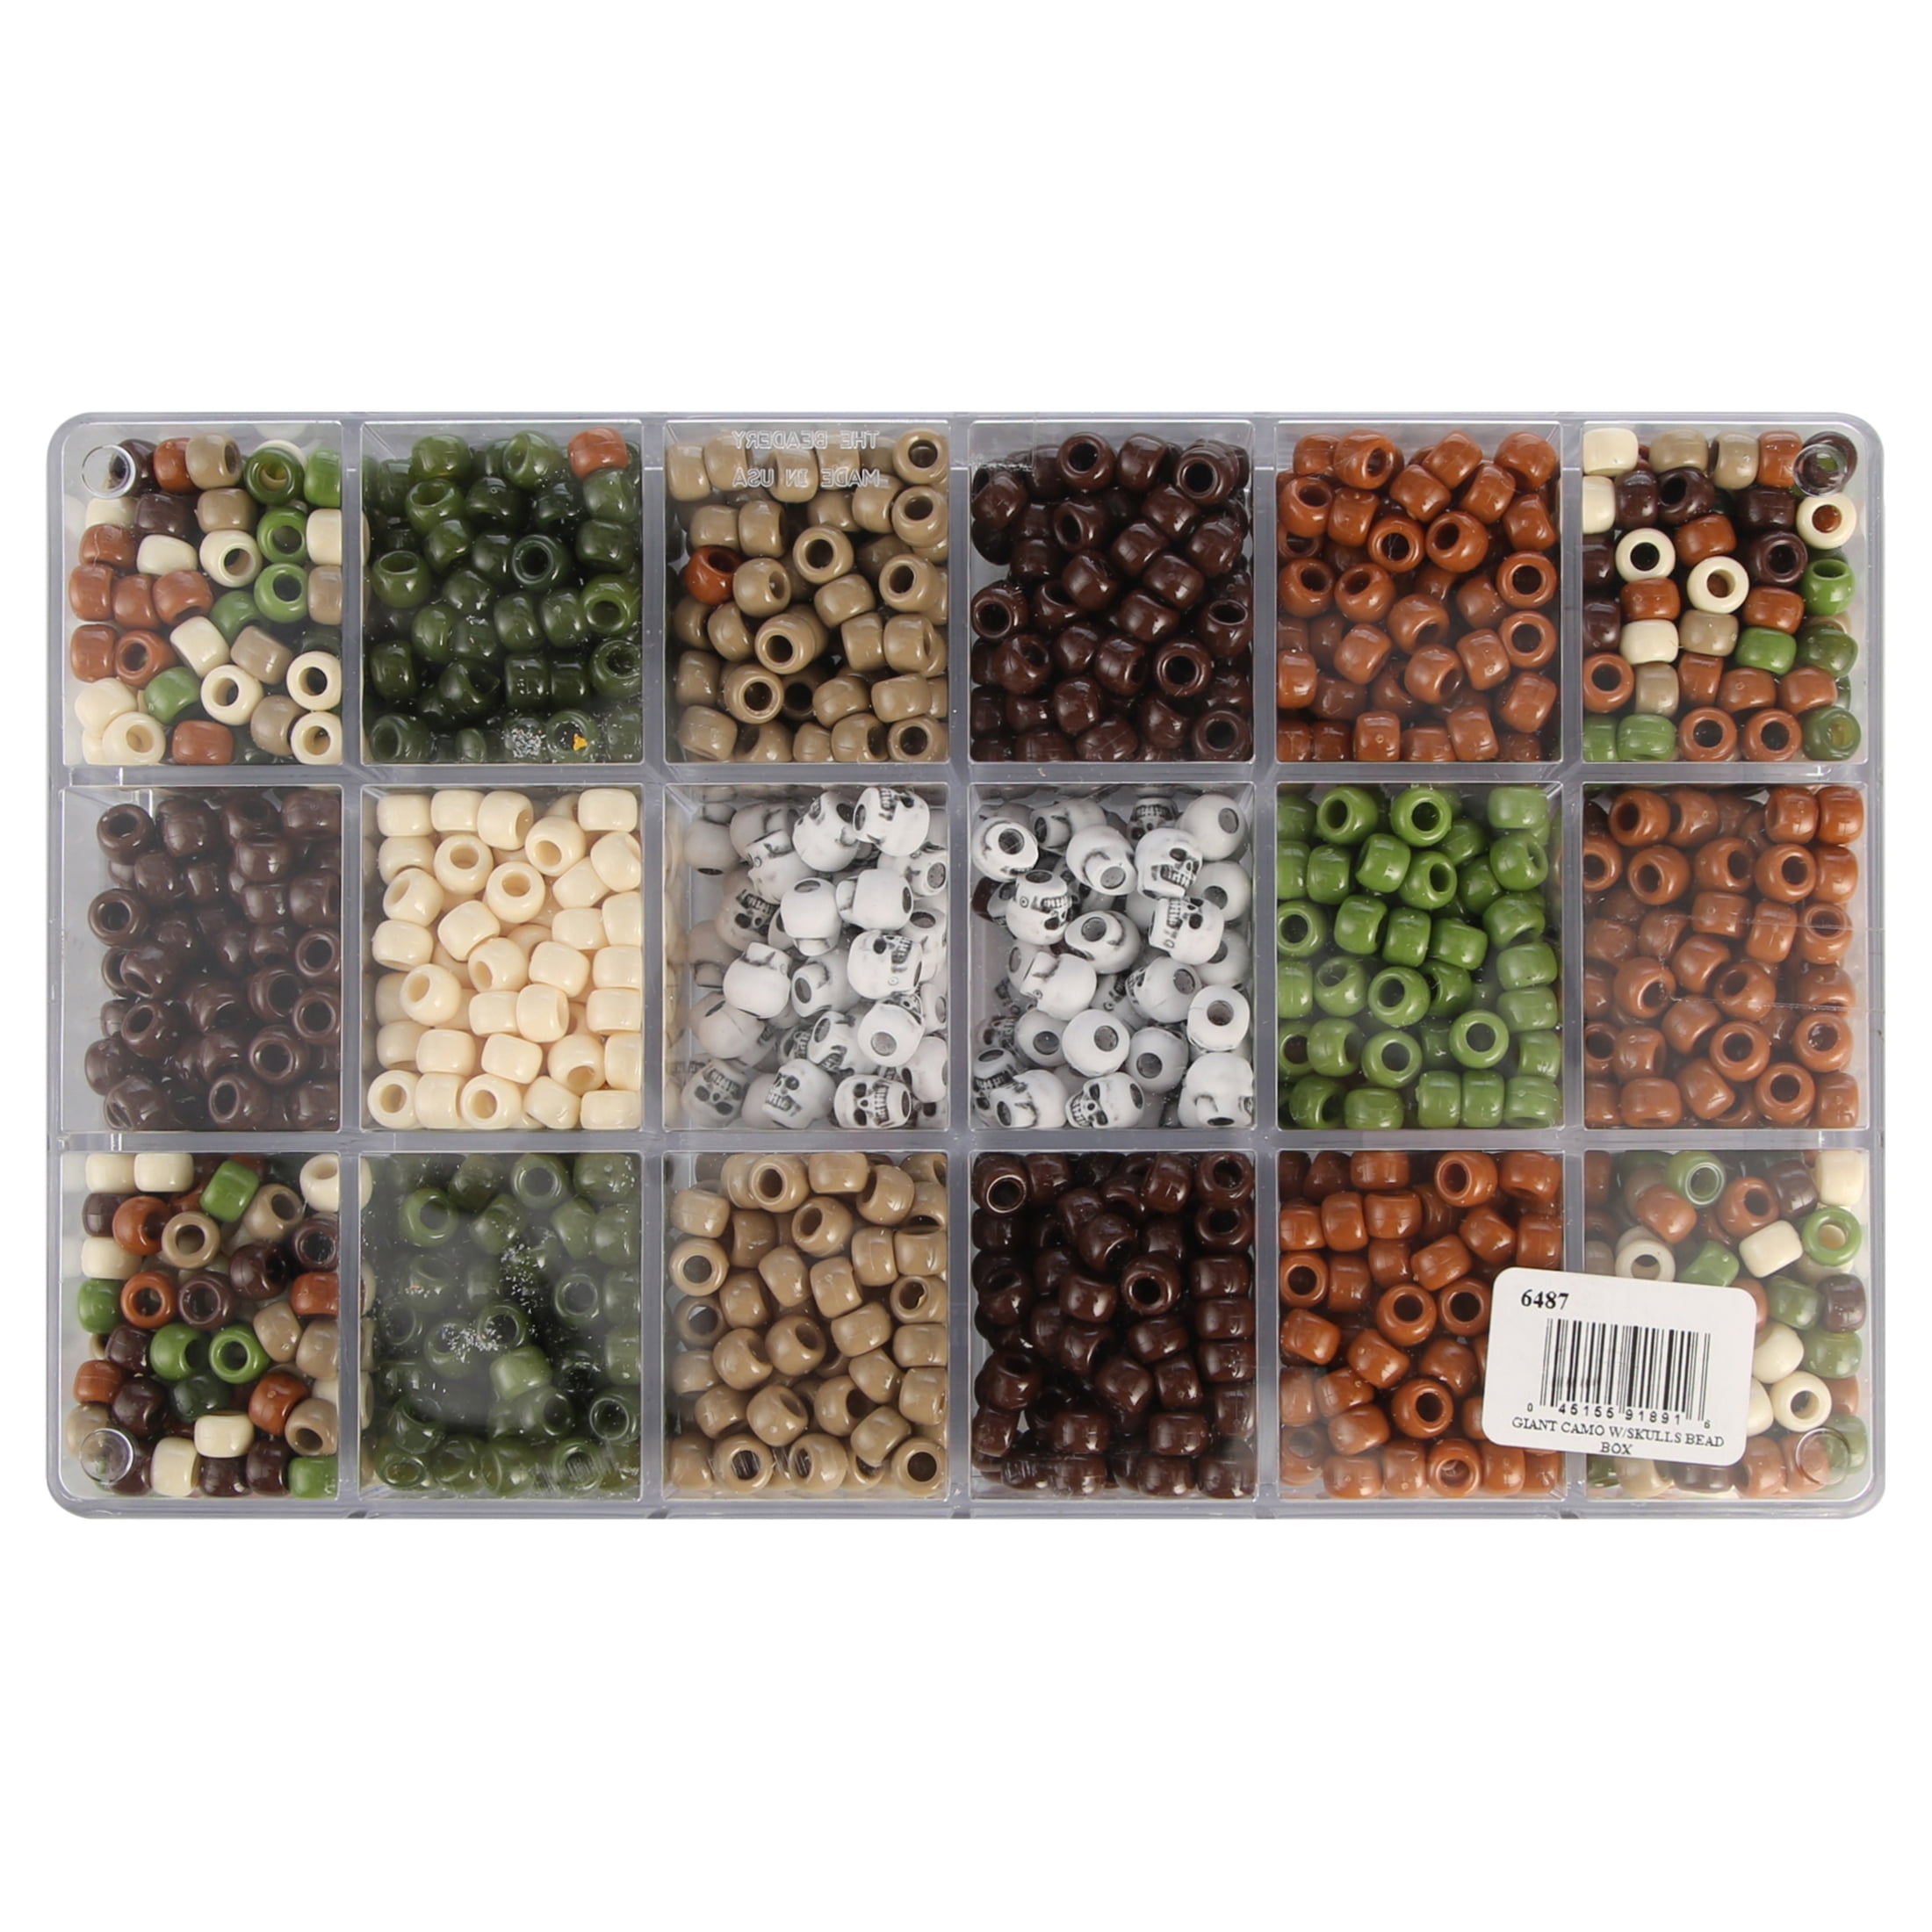 Buy Camouflage Skull Beads, 1/4-lb Bag at S&S Worldwide